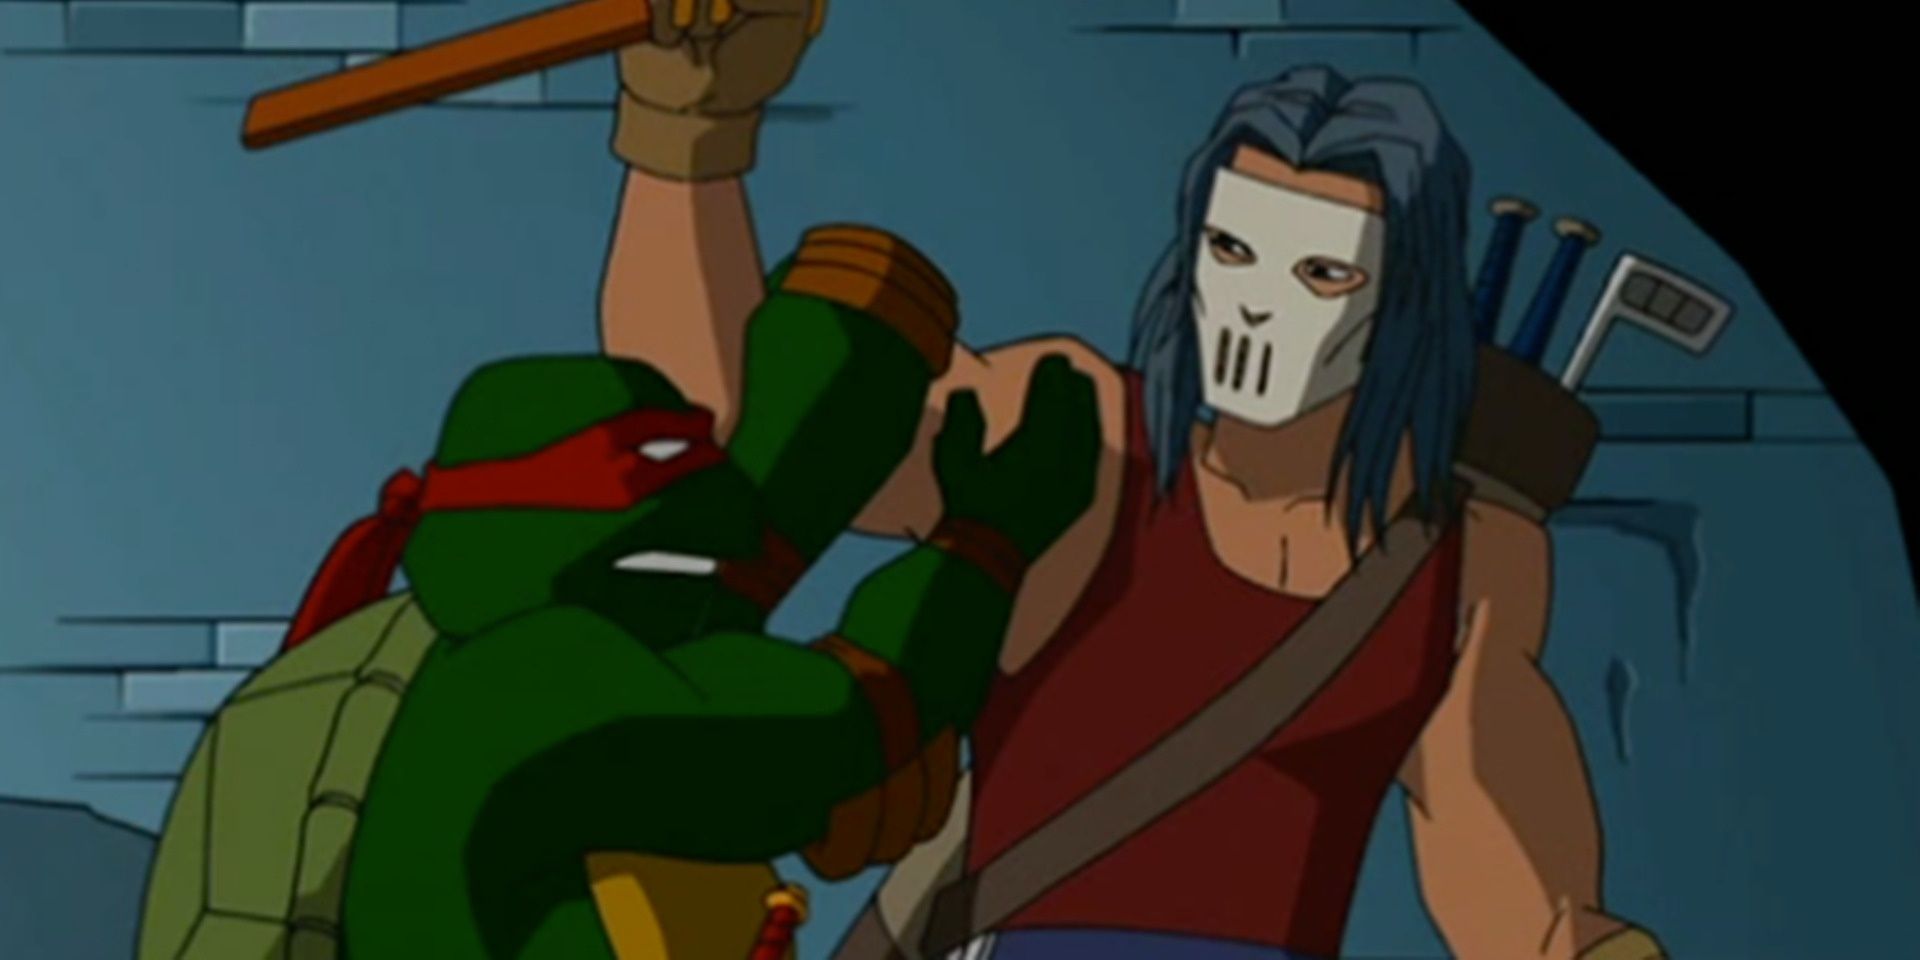 Teenage Mutant Ninja Turtle Raphael (left) fighting Casey Jones in a red top and a hockey mask (right). Image credit: paramountplus.com